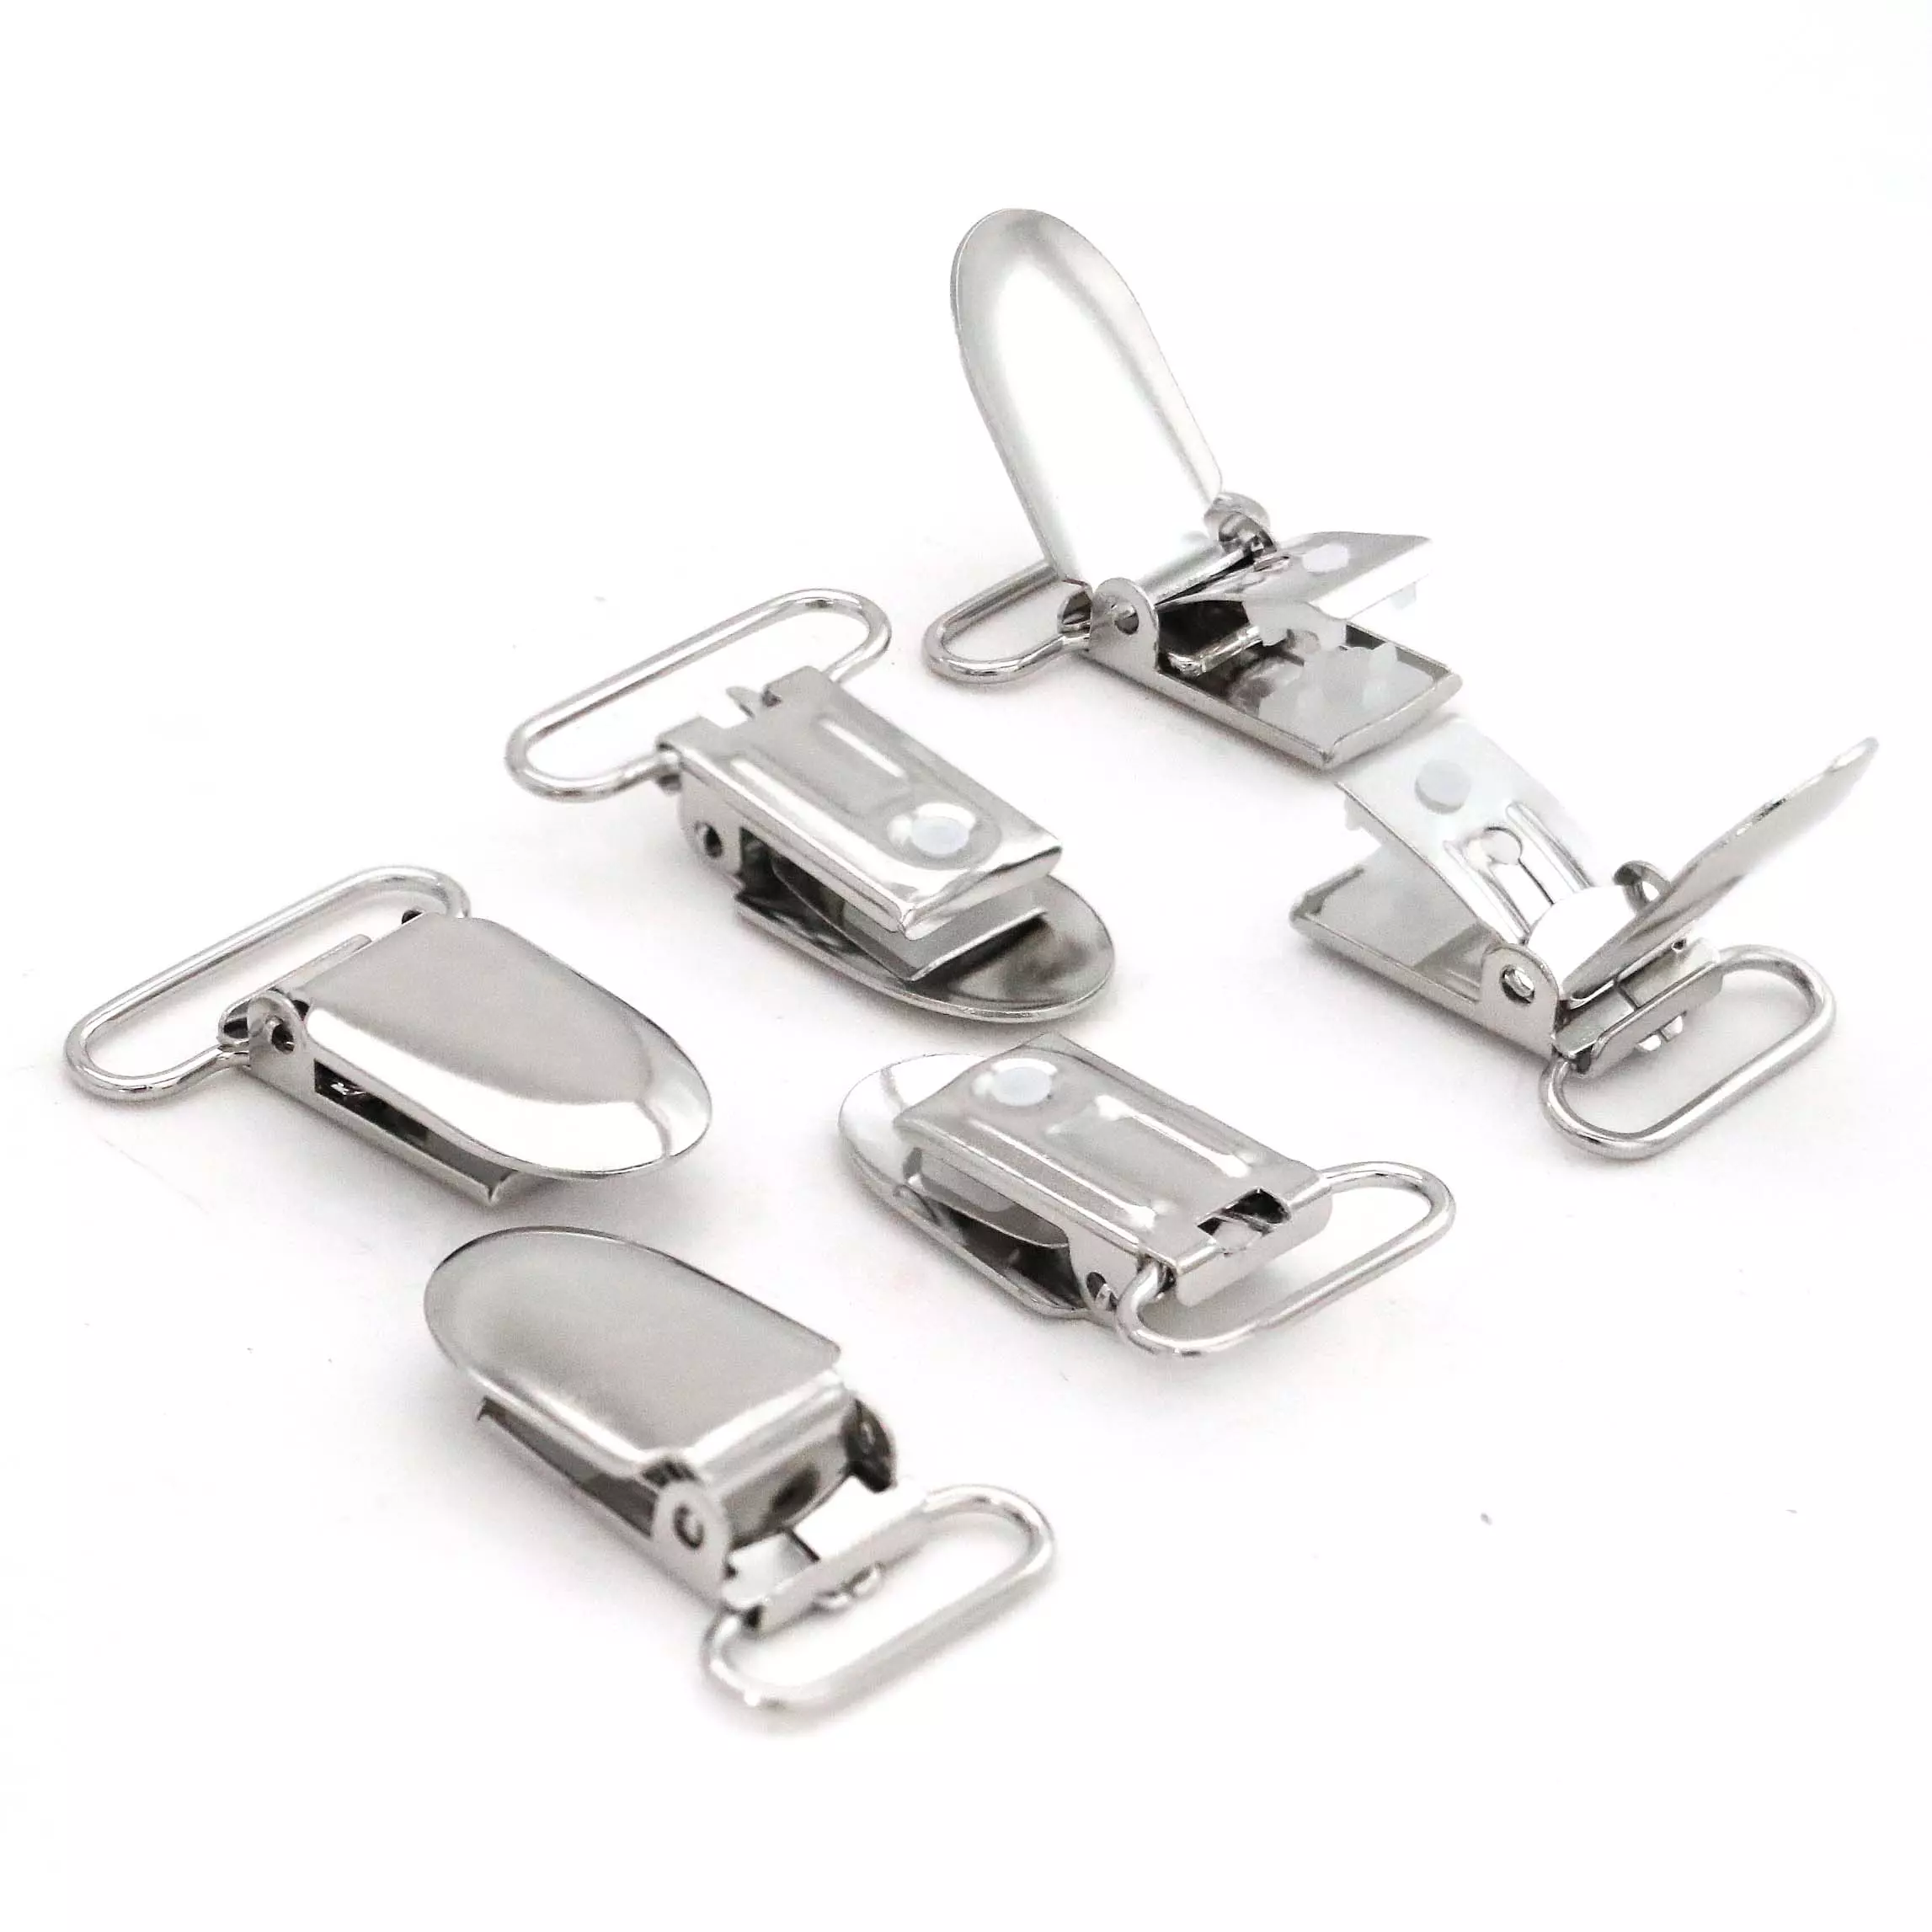  Buyless Fashion 1” Heavy Duty Metal Clips for Suspenders,  Pacifiers, Bib Clips, Toy Holder Or Mitten Clips – 20 Clips : Office  Products